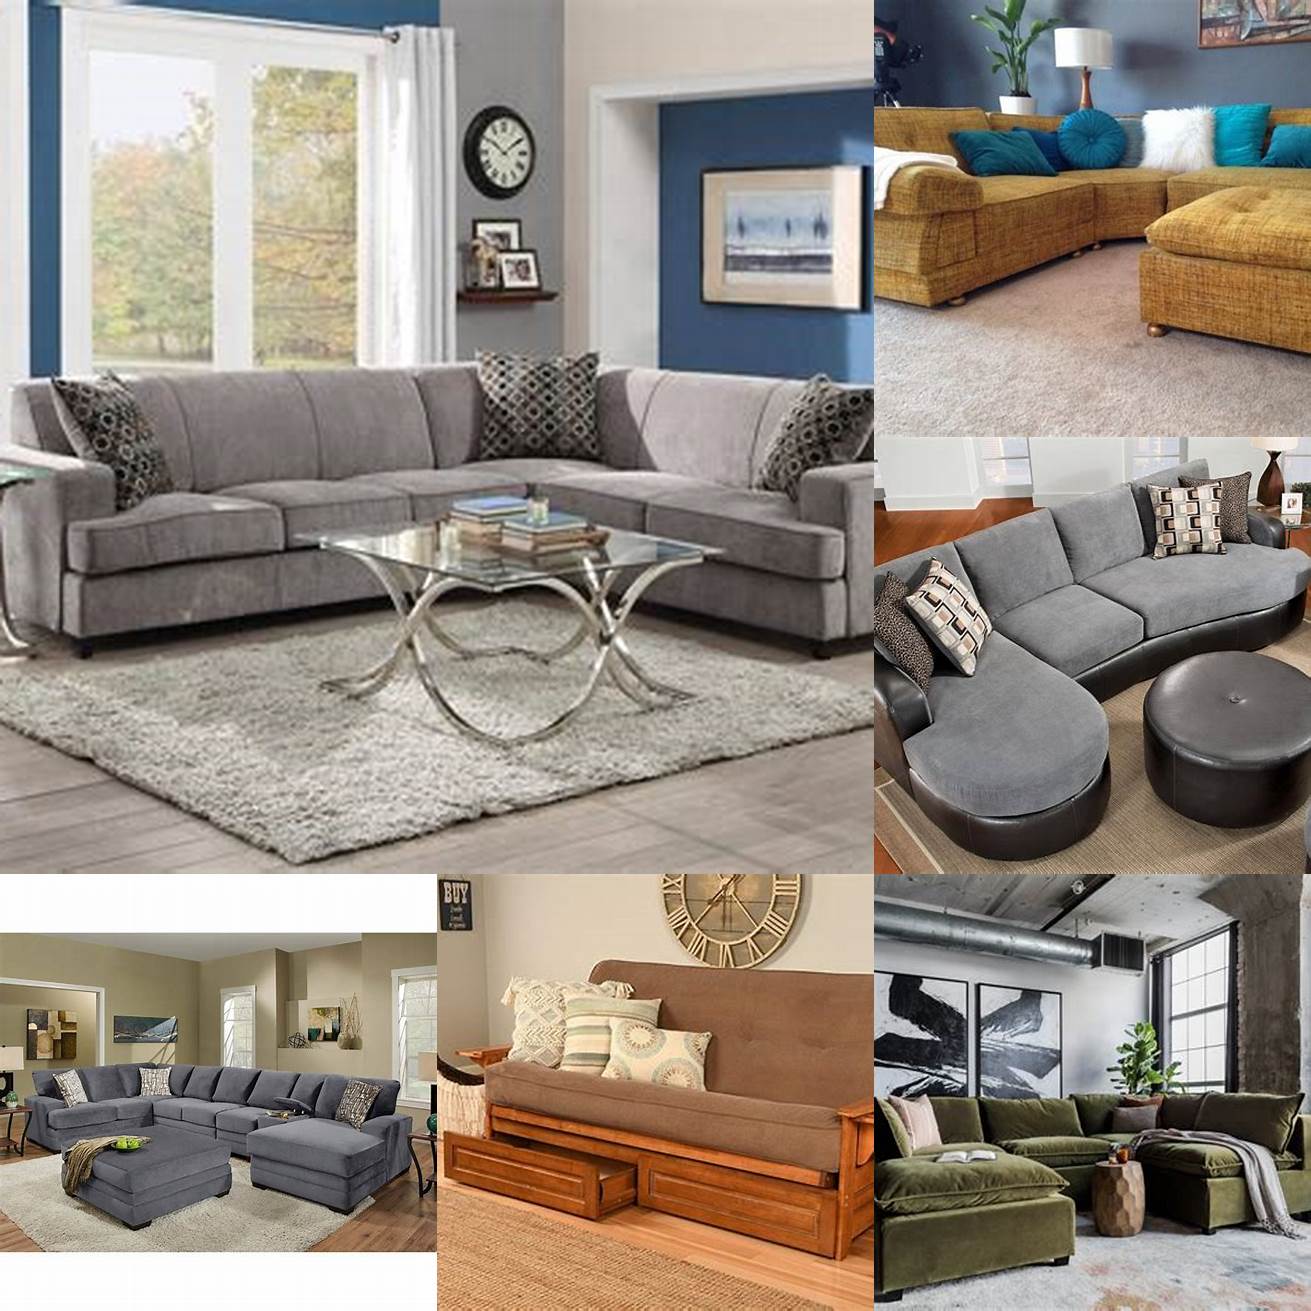 7 Look for Durable Furniture